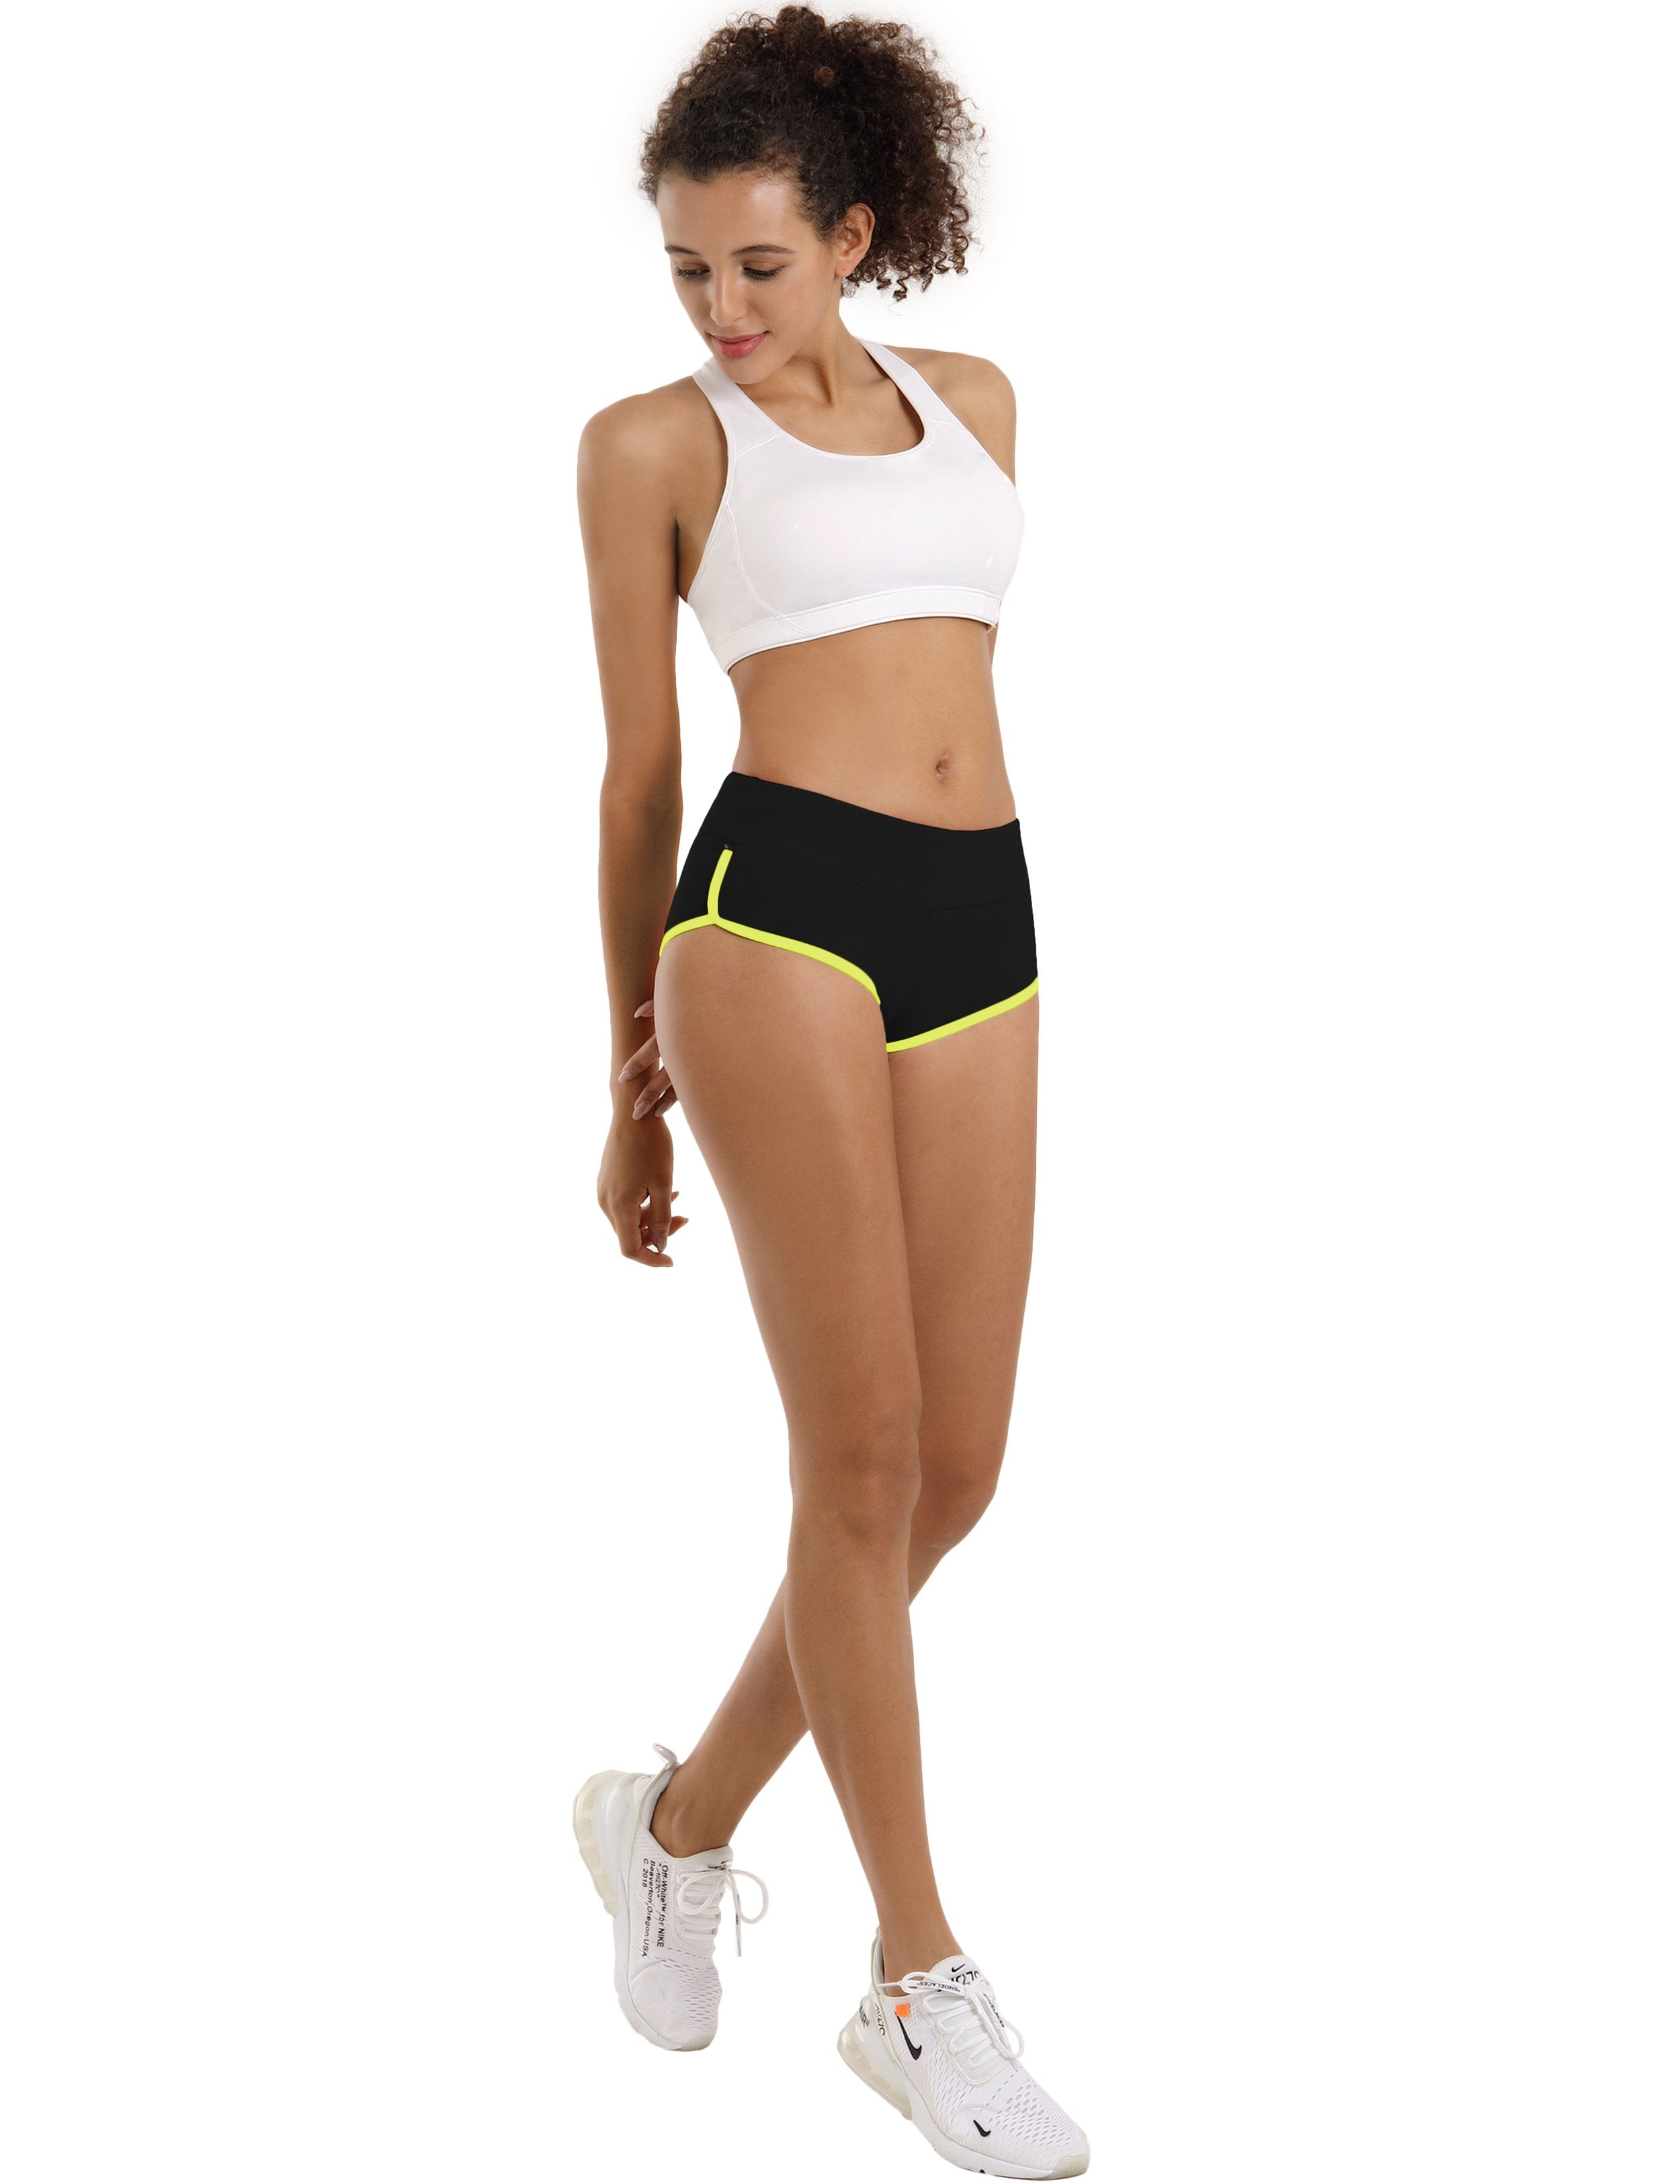 Sexy Booty Golf Shorts black_fluorescentyellow Sleek, soft, smooth and totally comfortable: our newest sexy style is here. Softest-ever fabric High elasticity High density 4-way stretch Fabric doesn't attract lint easily No see-through Moisture-wicking Machine wash 75%Nylon/25%Spandex